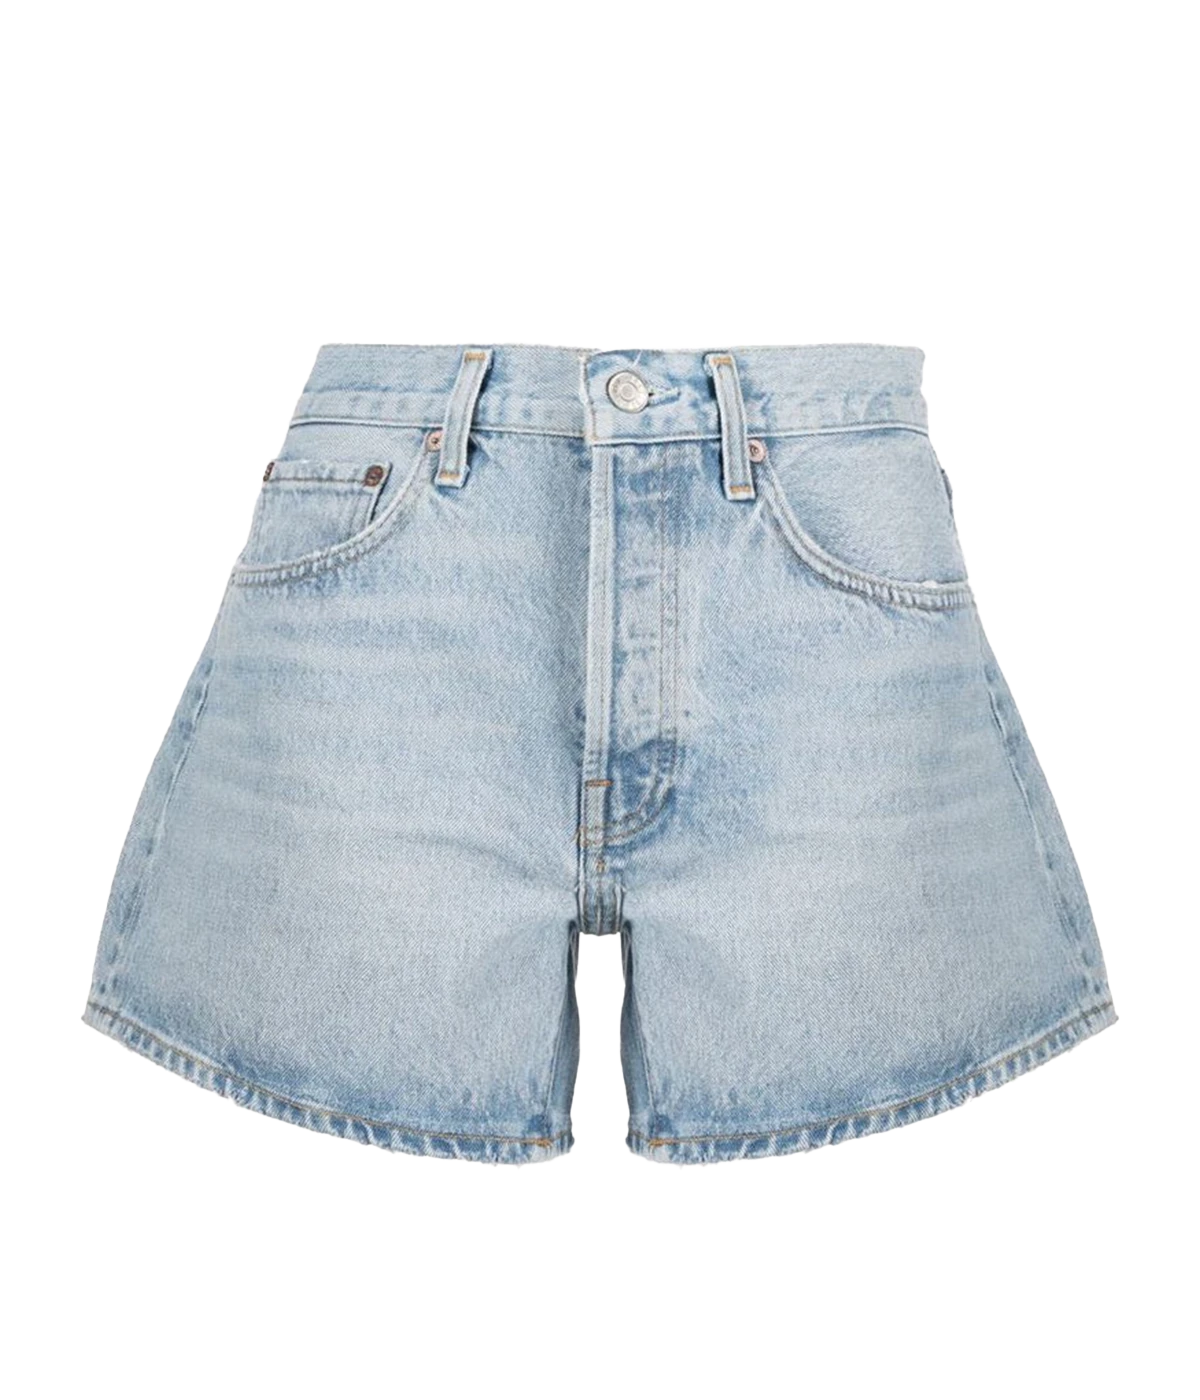 A ridged denim short in a light blue wash colourway, with a zip and button fly, longer leg and clean hem. Rigid Denim, made in USA, comfortable, summer short, summer staple, everyday basic.